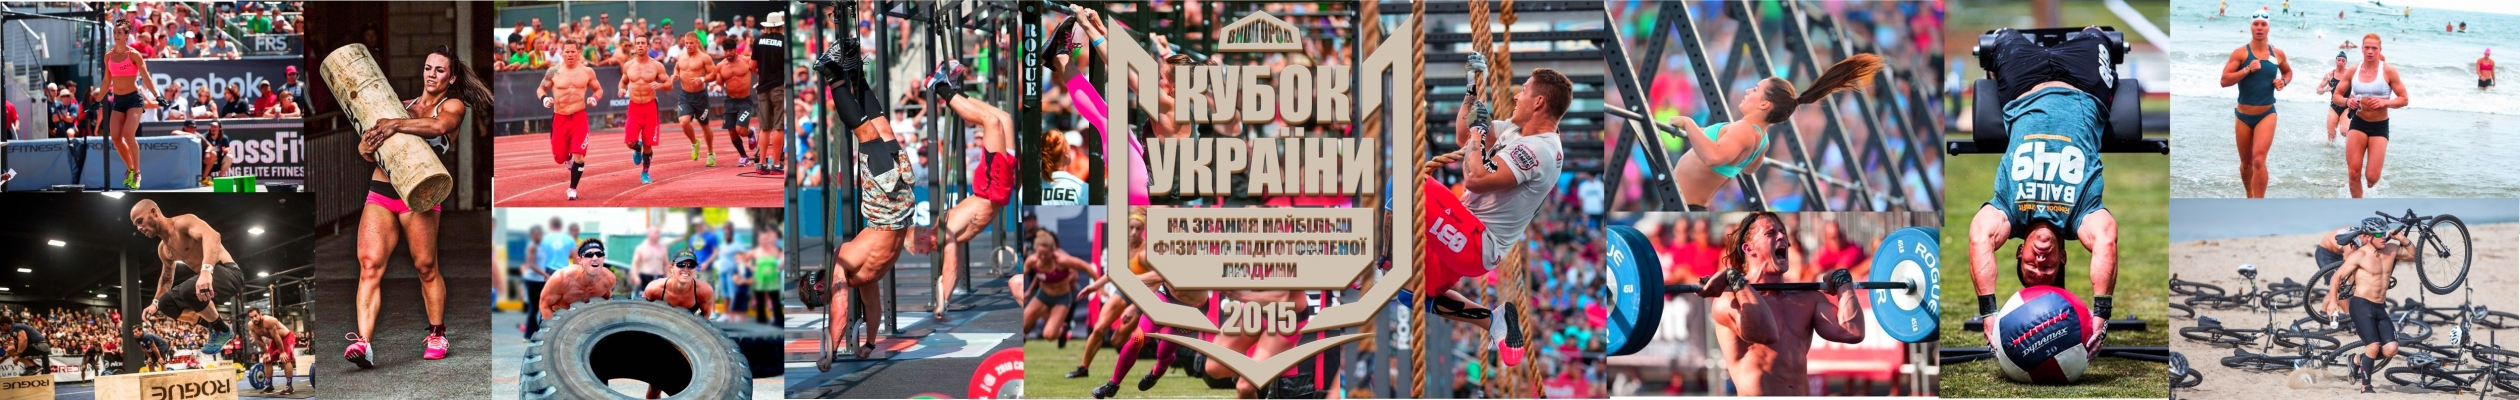 Cup of Ukraine the fittest on 2015